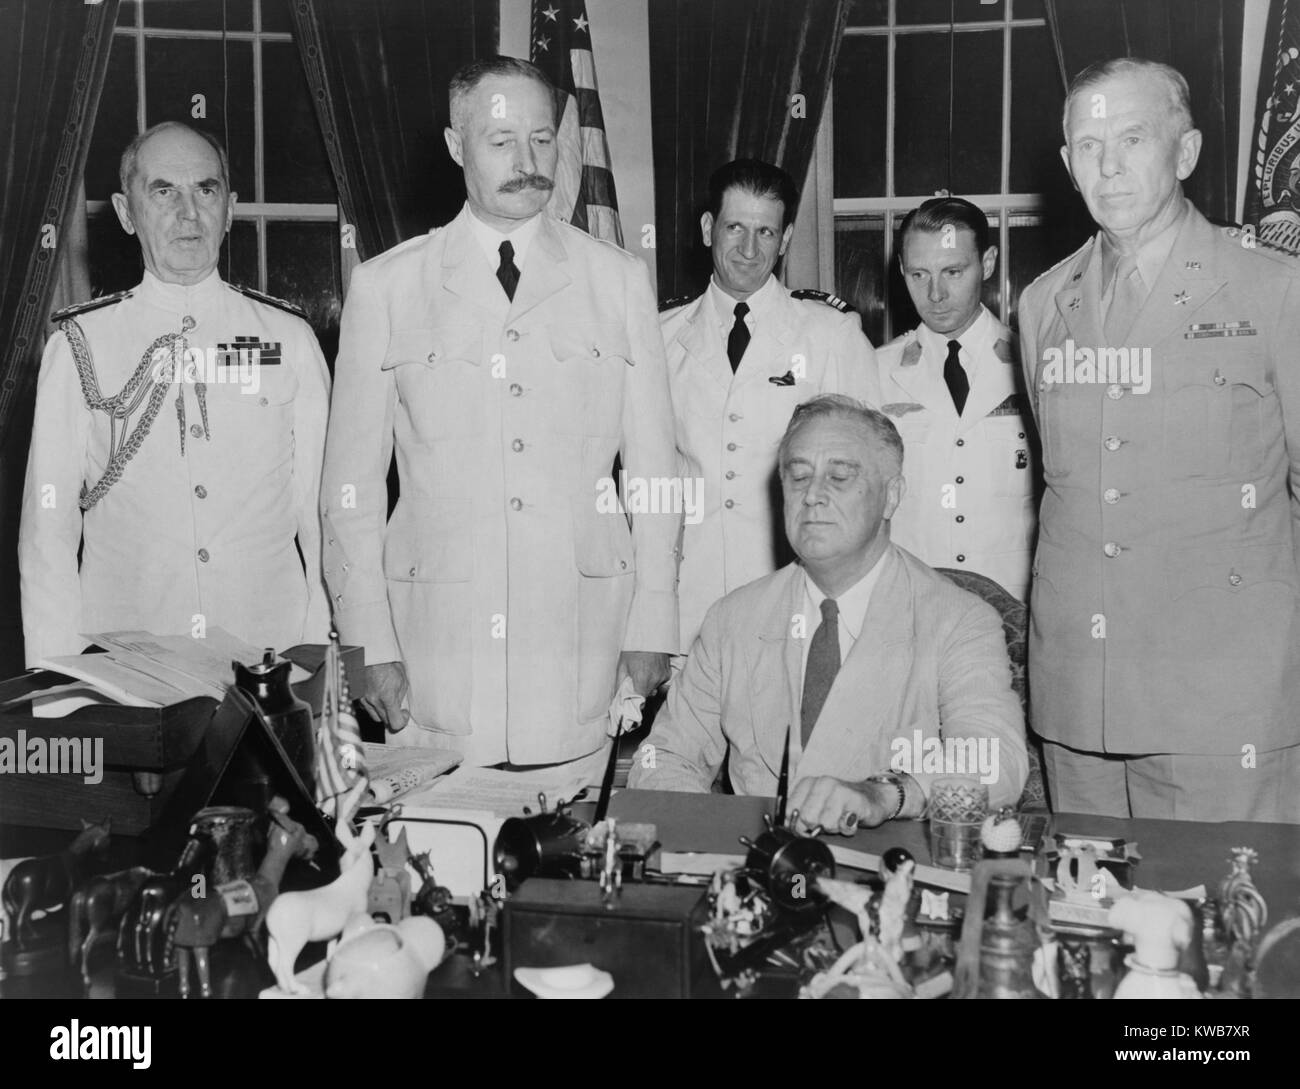 President Roosevelt hosts French General Henri Giraud, of French forces in Africa, July 1943. Giraud and Charles DeGaulle were rivals for French wartime leadership, with Giraud favored by the U.S. in 1943. Soon, his poor political skills reduced his influence. Standing behind FDR: Adm. William Leahy (far left); Gen. Henri Giraud (left); Gen. George Marshall (far right); in back are two of Giraud's aides. World War 2. (BSLOC 2014 8 190) Stock Photo